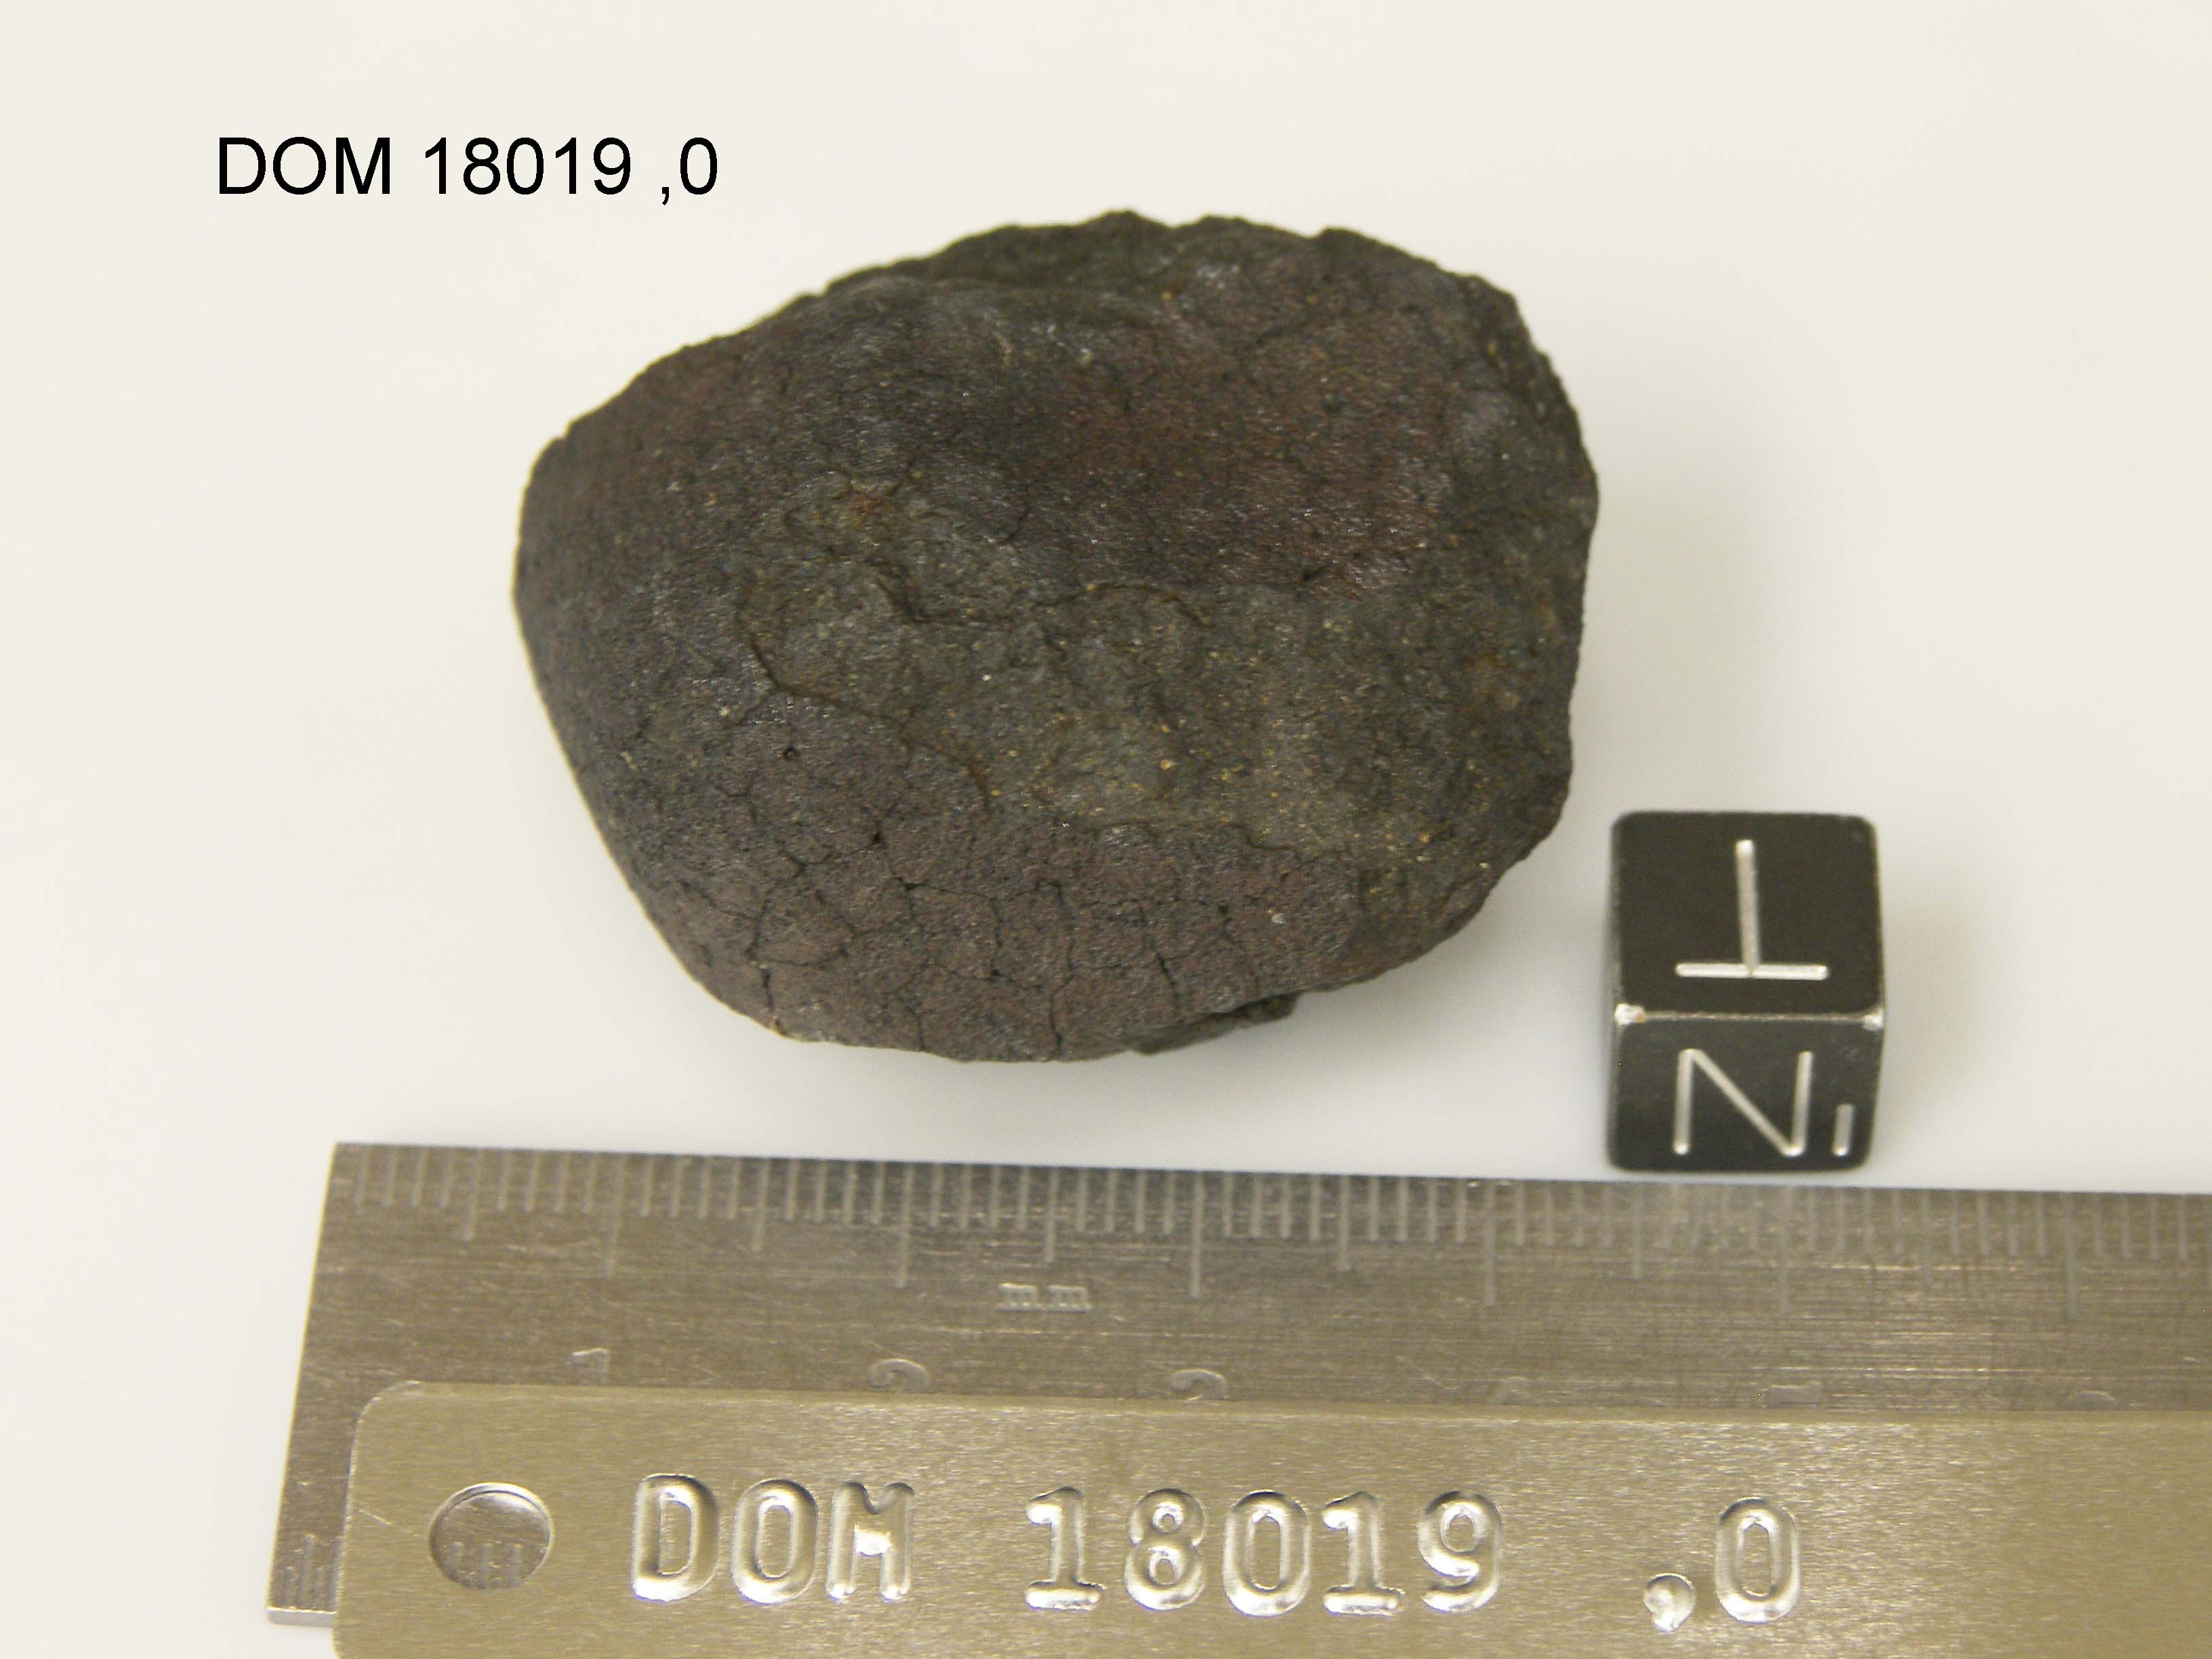 Lab Photo of Sample DOM 18019 Displaying Top North Orientation